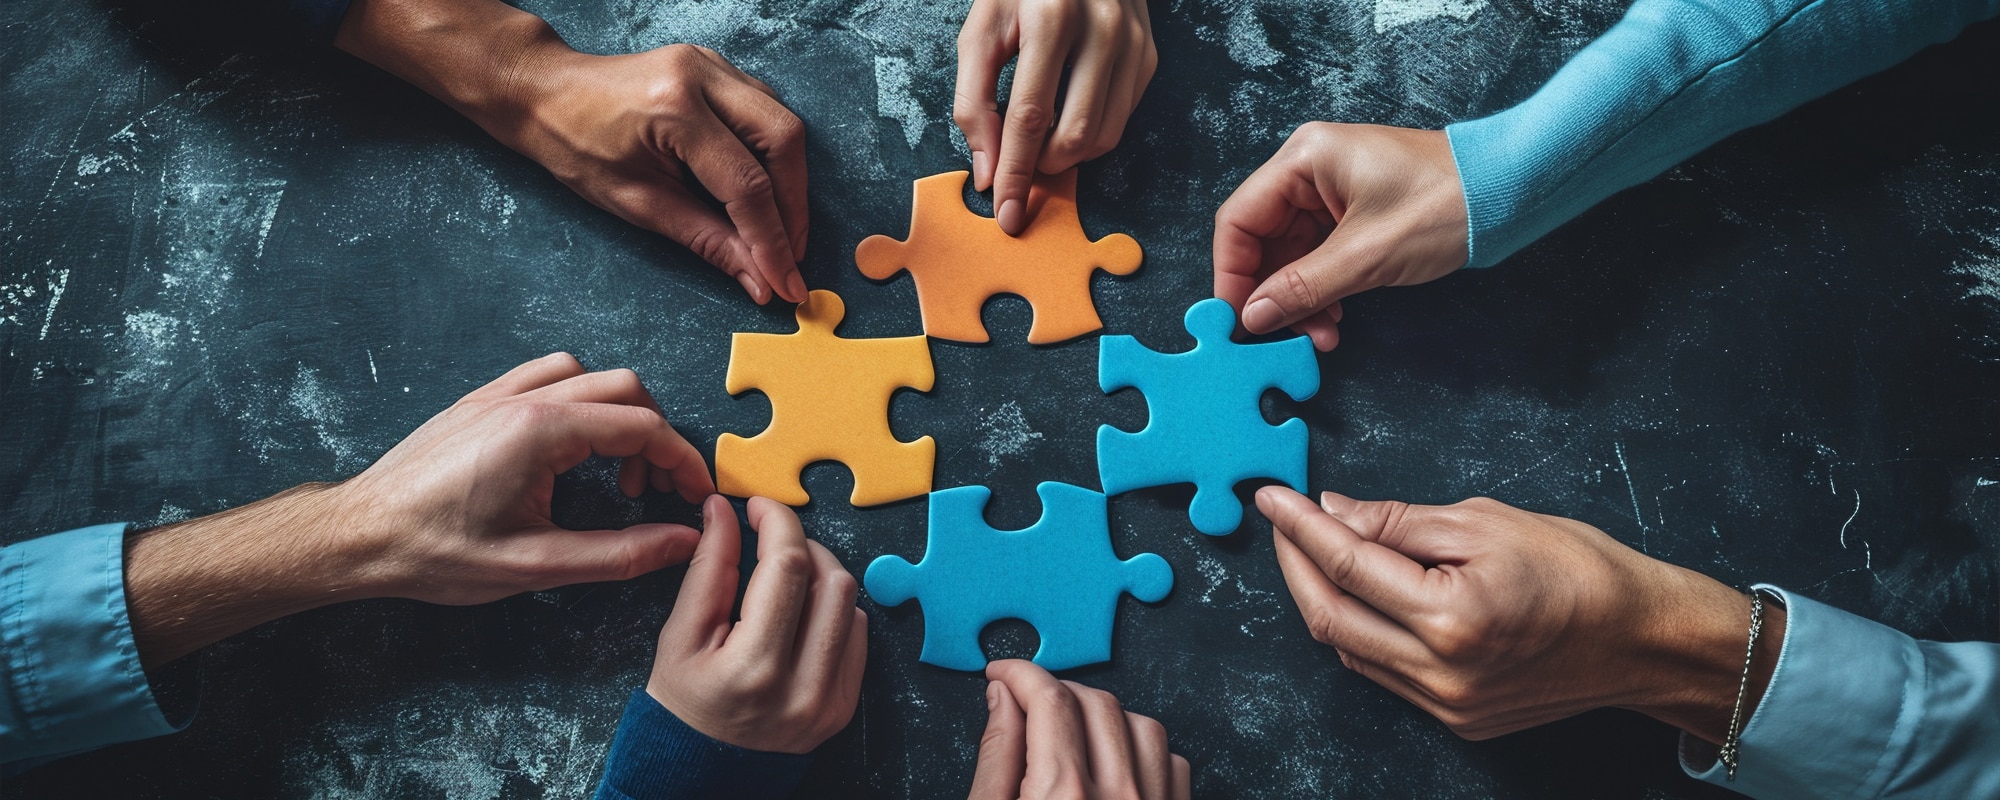 Hands placing puzzle pieces together on a table, signifying team building